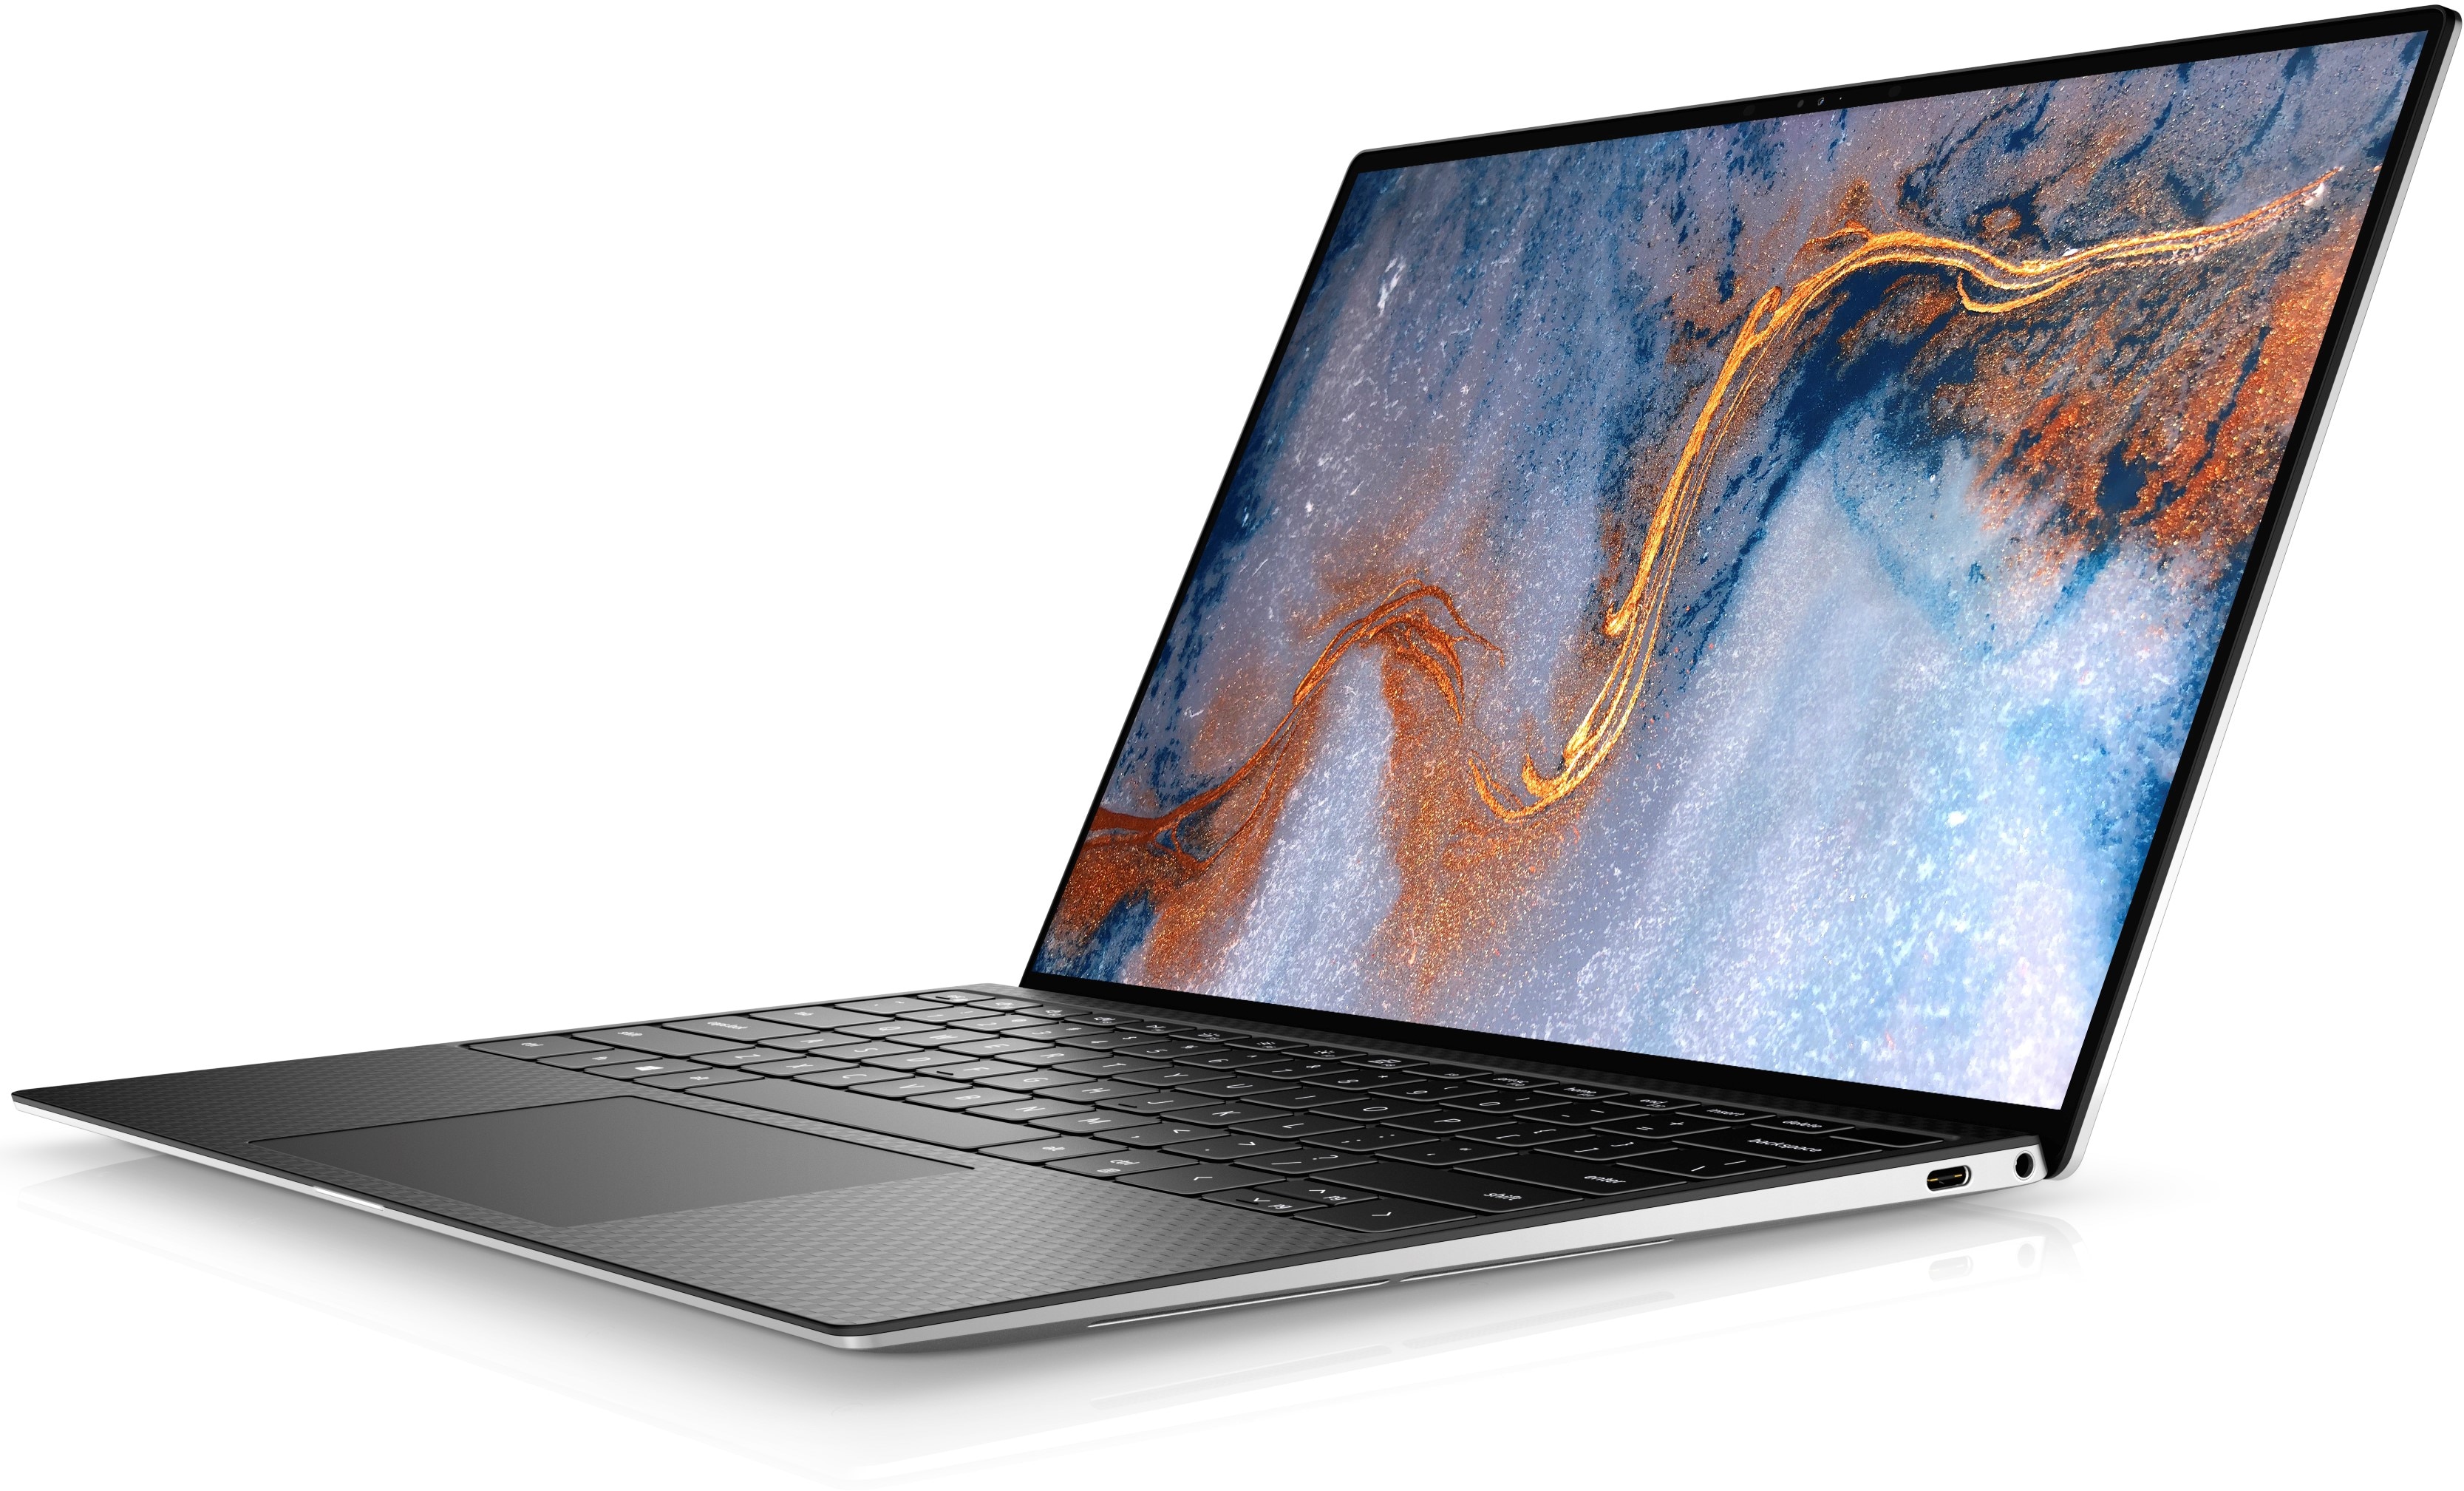 Dell XPS 13 (9310) Laptop | Dell India